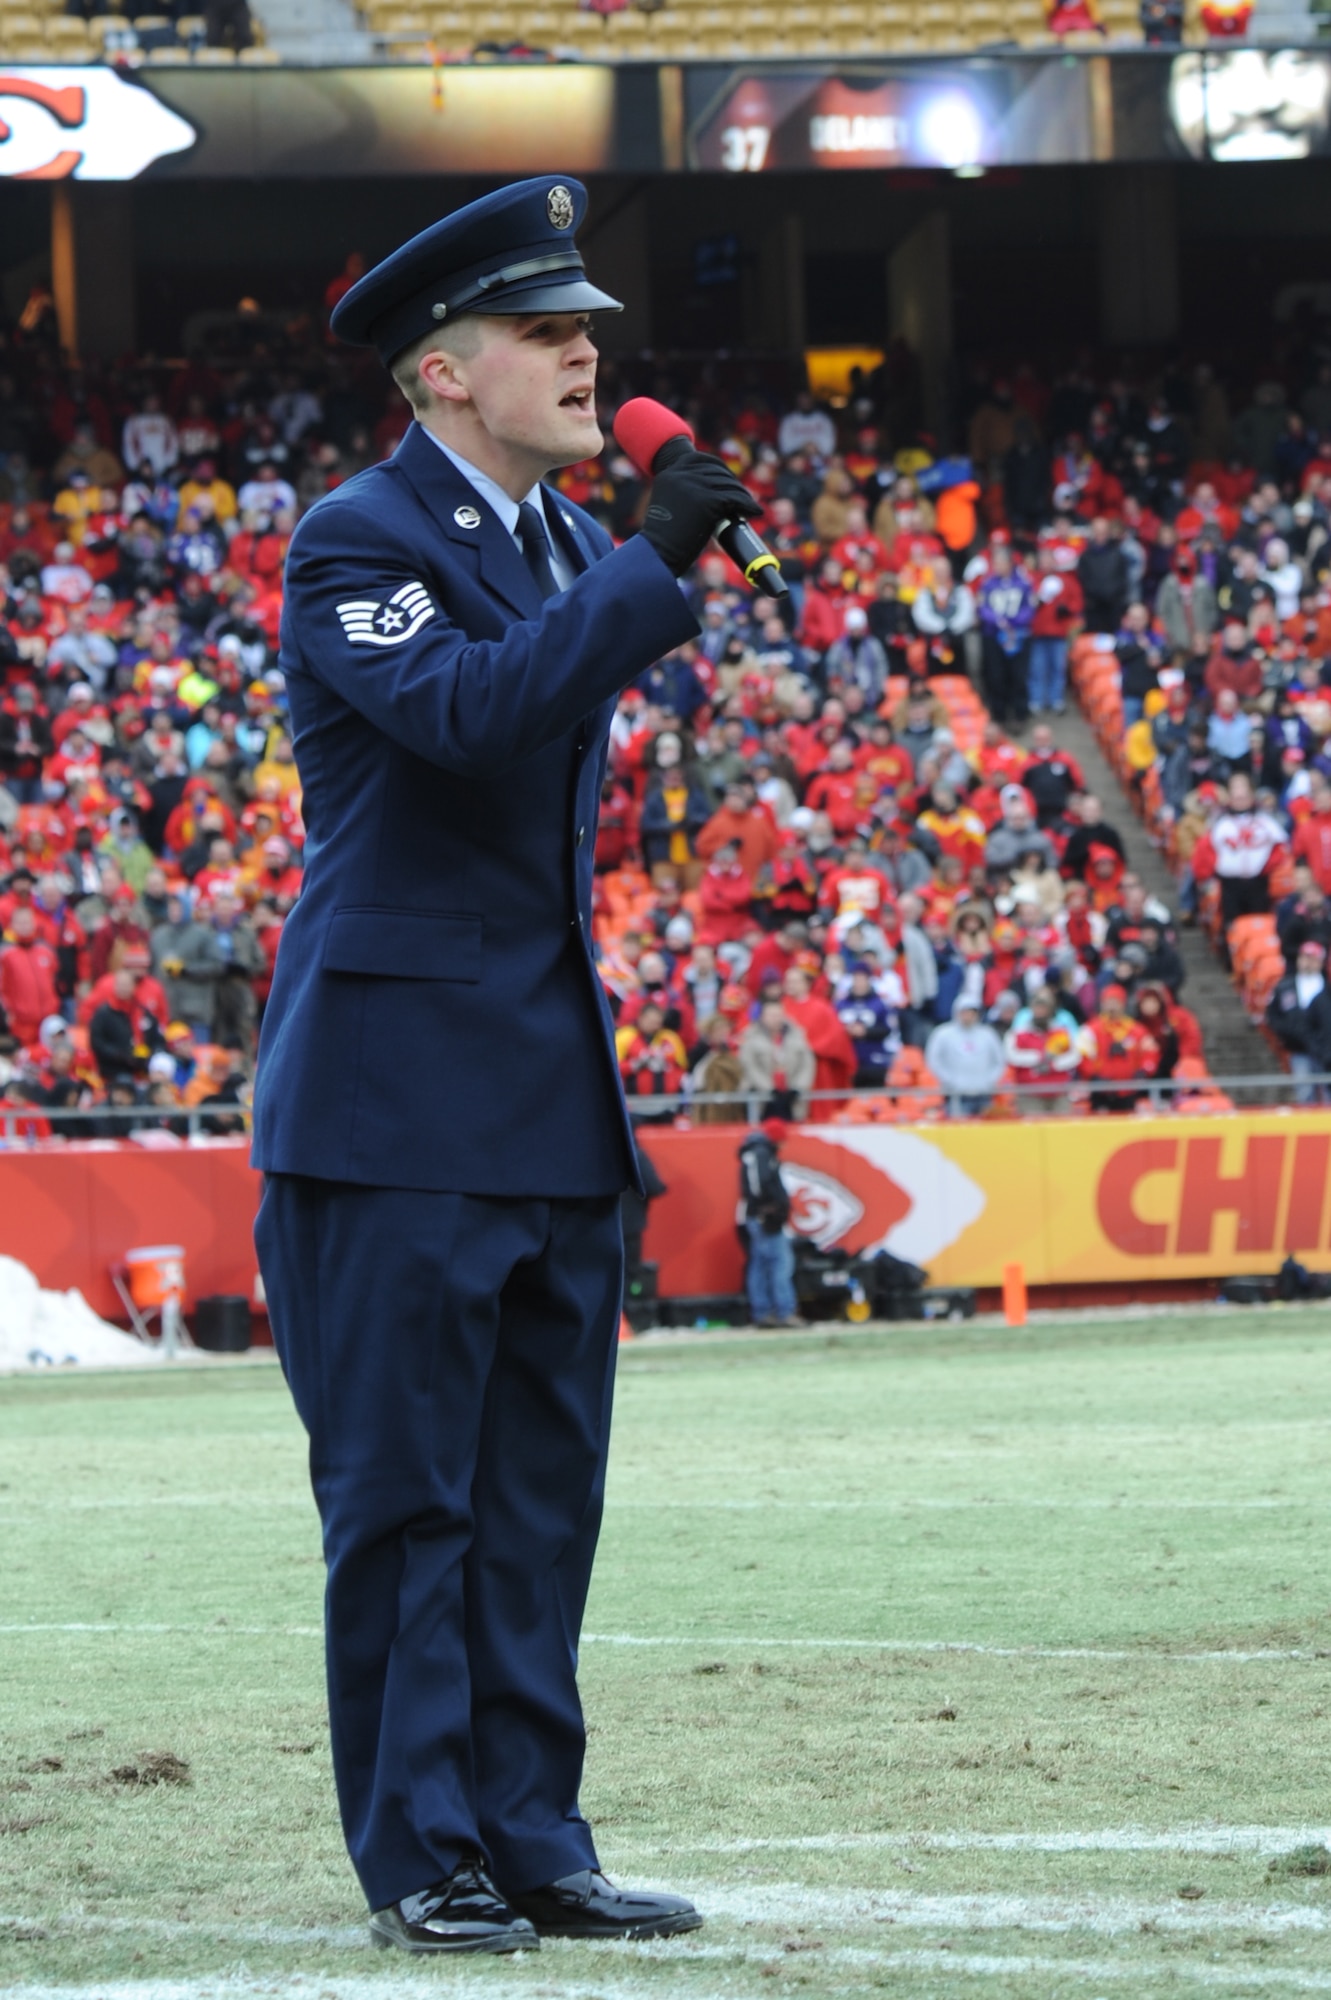 KANSAS CITY, Mo. - Staff Sgt. Nathan Tawbush, 19th Munitions Squadron weapons maintenance team chief, sings 'God Bless America' during the half-time show of the Kansas City Chiefs' Wild Card game against the Ravens Jan 9. The Ravens beat the Chiefs 30-7, advancing to the next round. (U.S. Air Force photo by Senior Airman Carlin Leslie)

